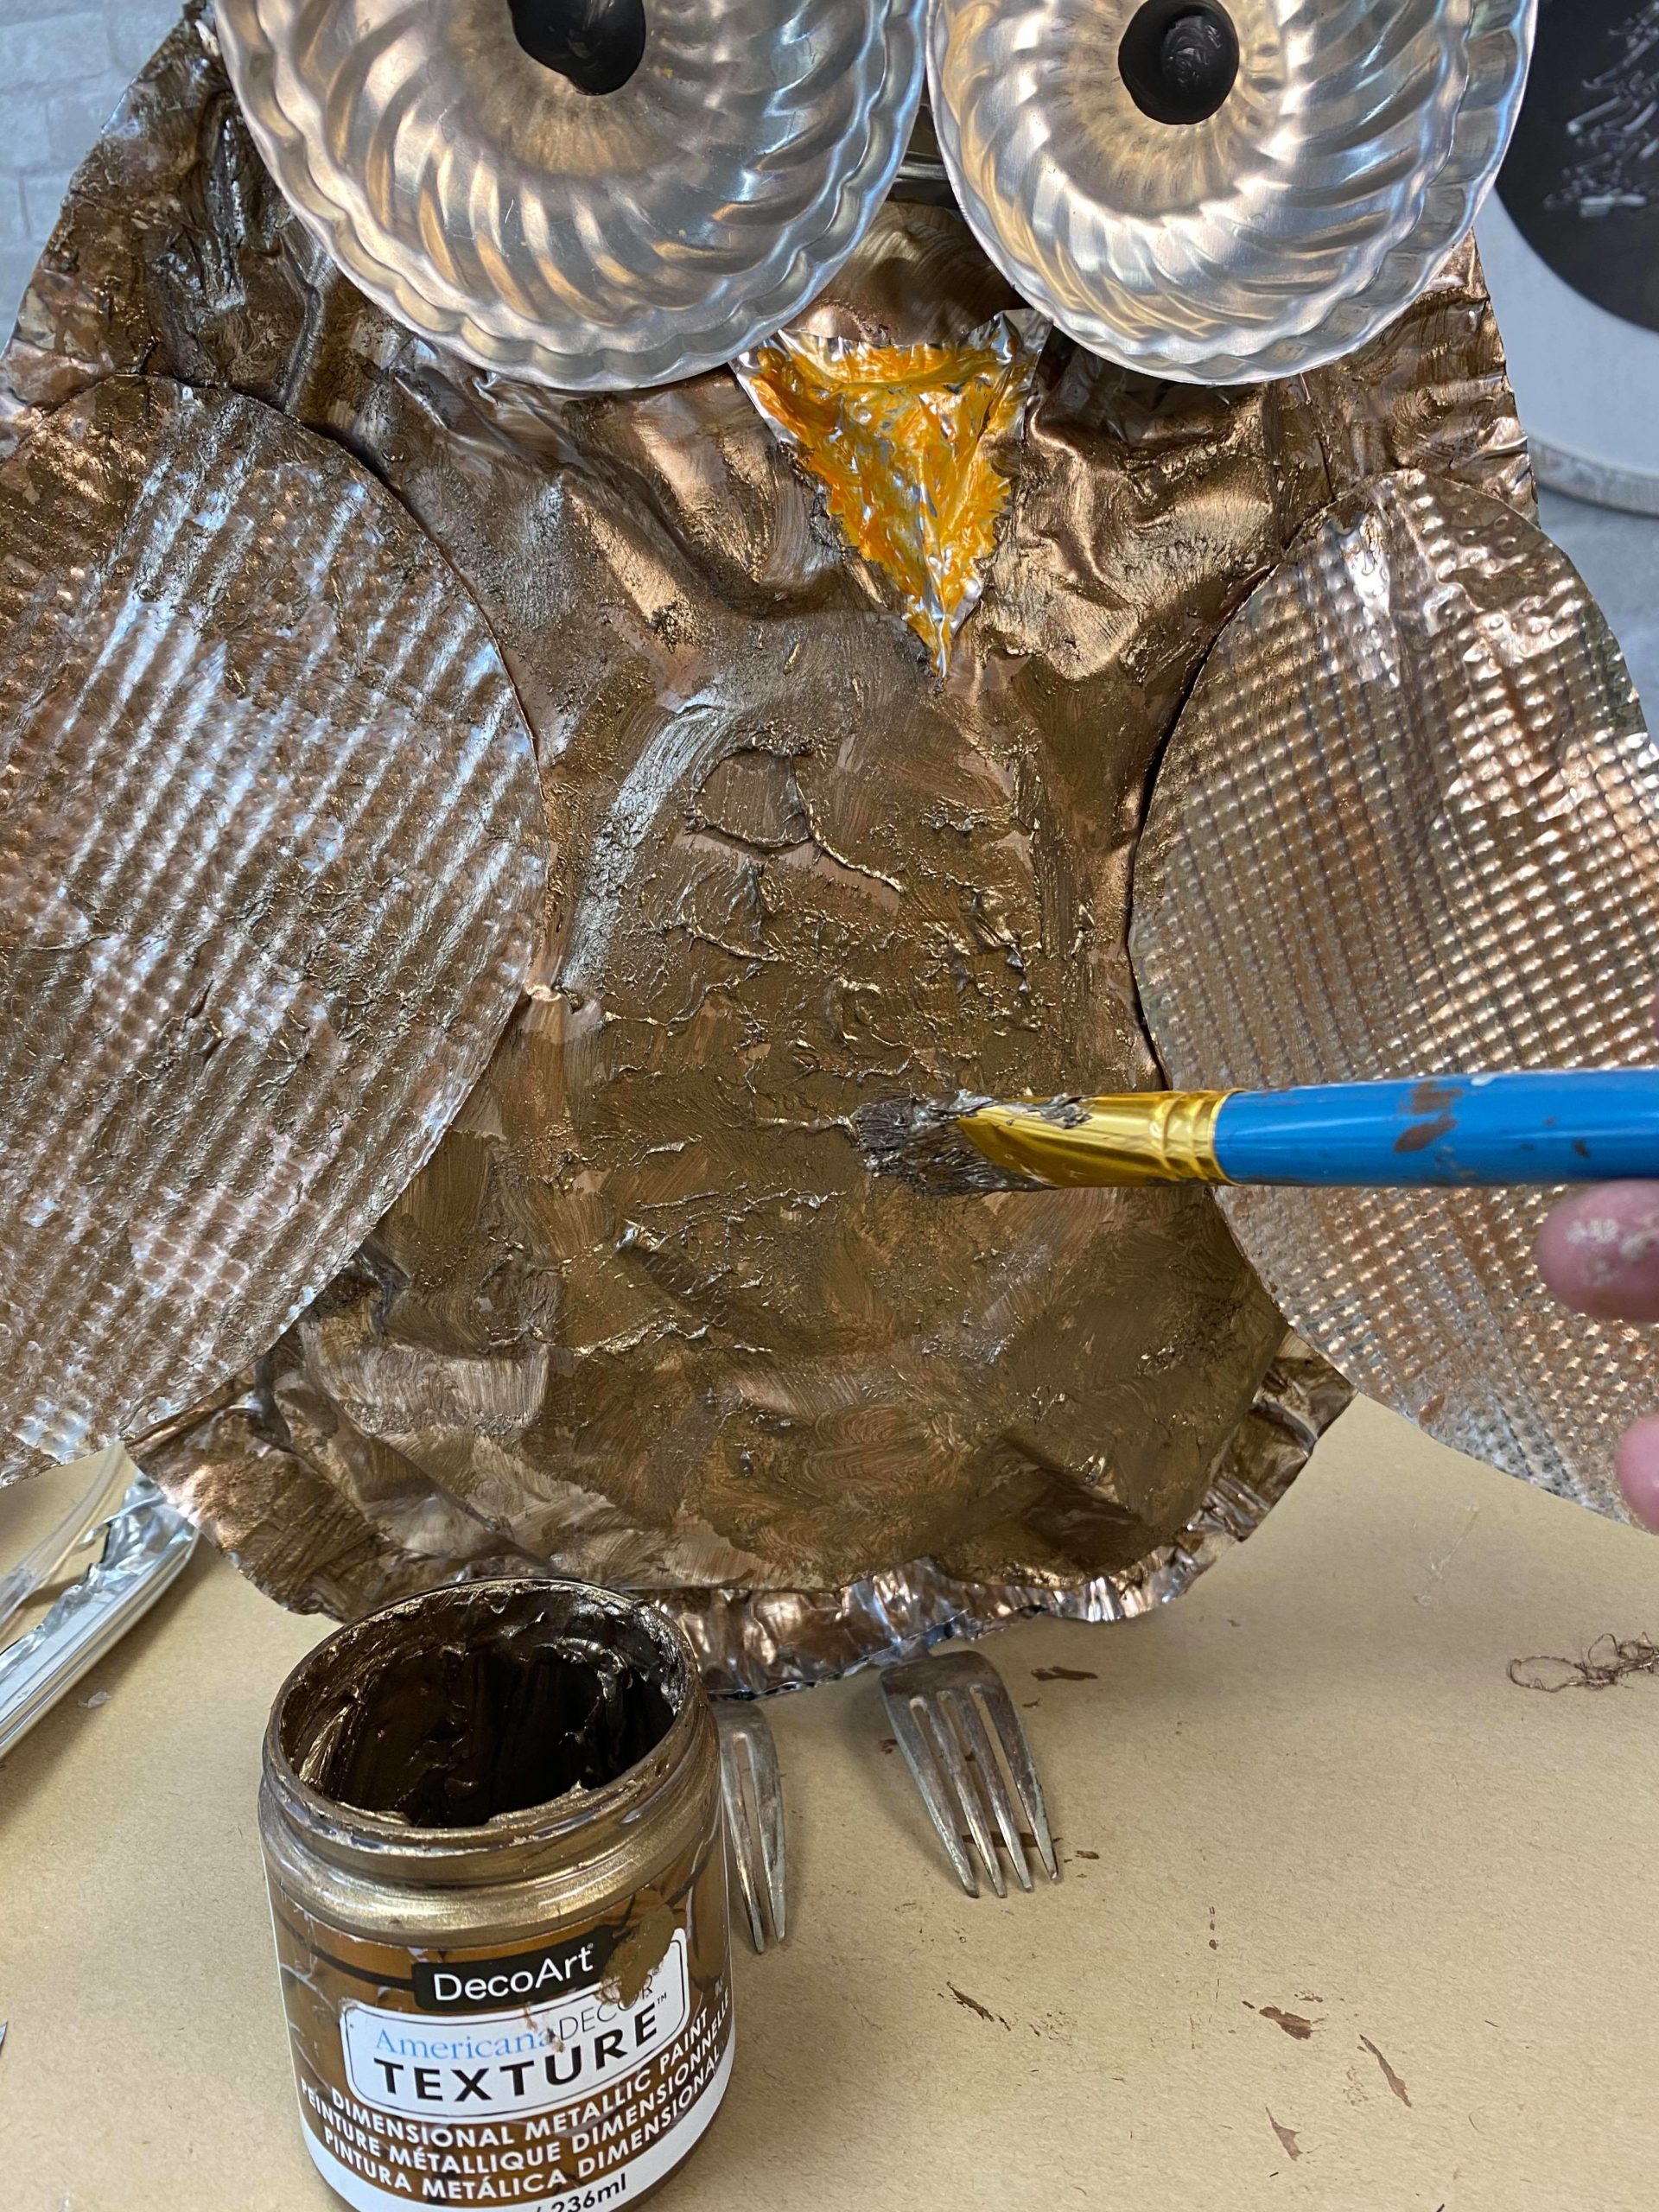 Aluminum Foil Owl Craft - Our Kid Things